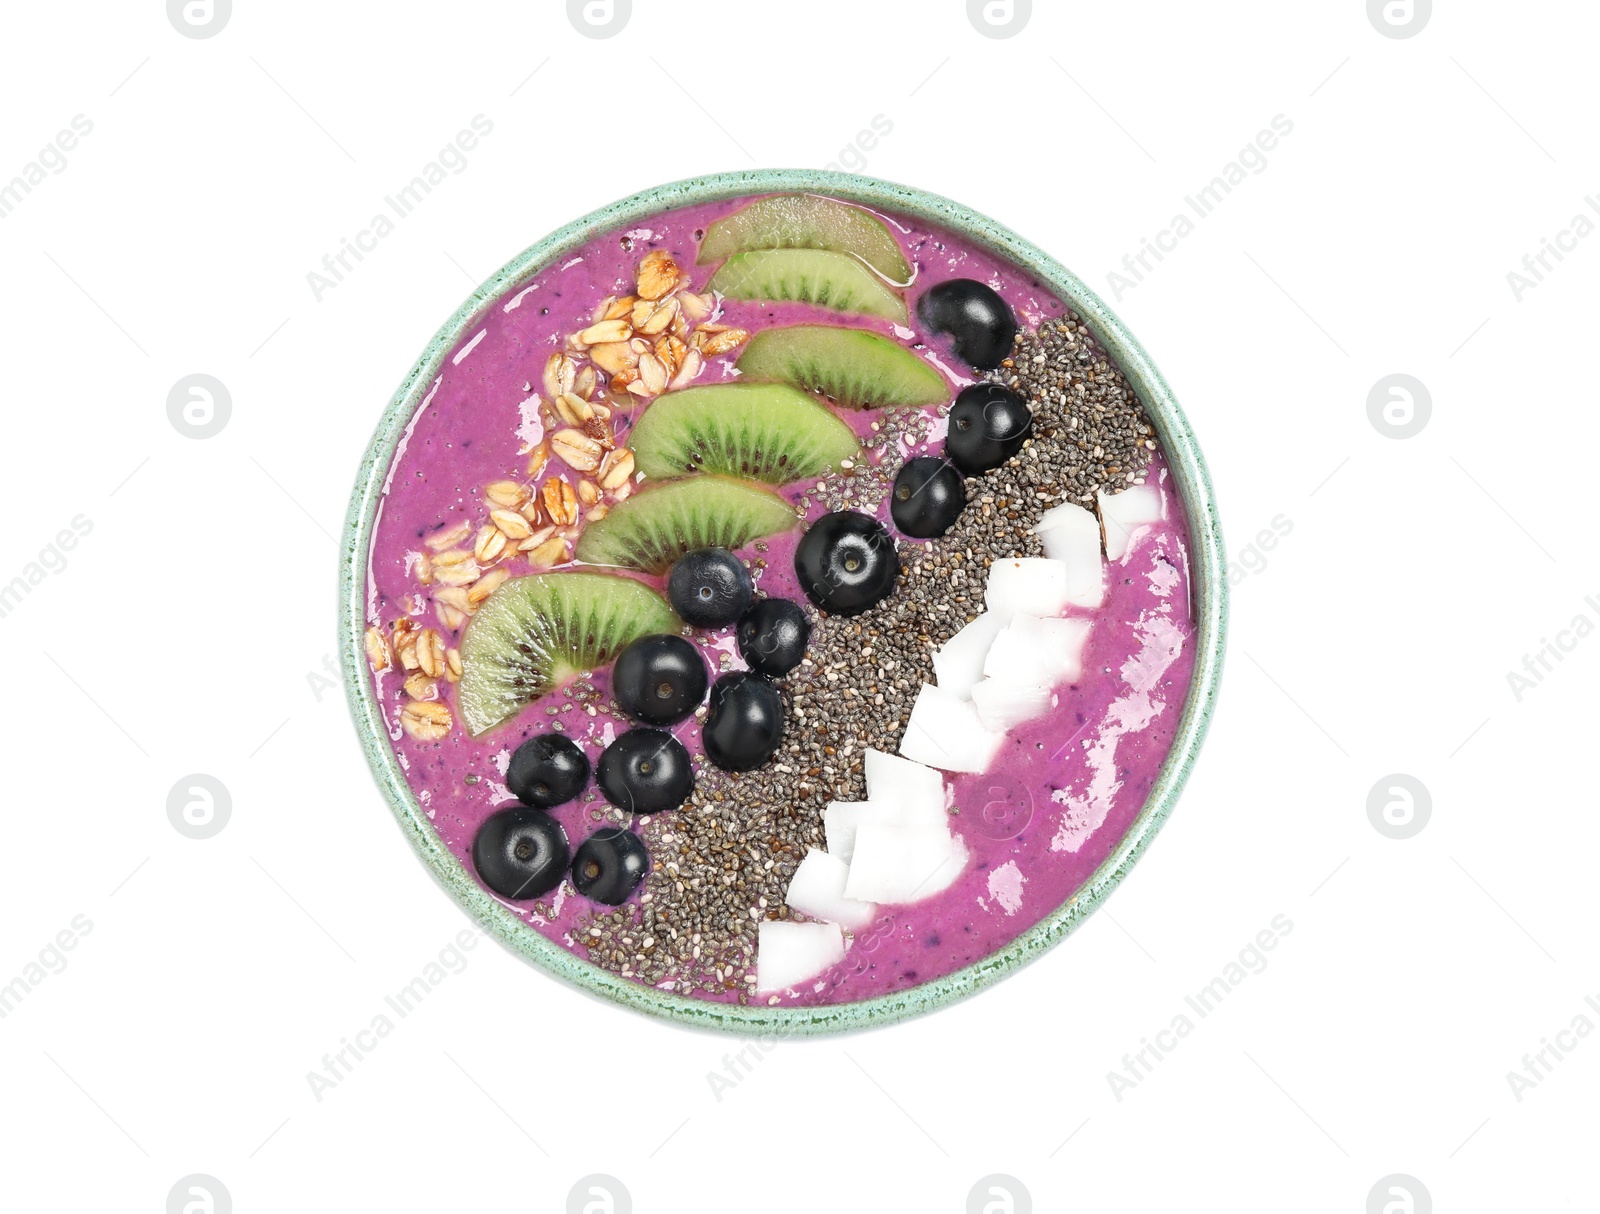 Photo of Healthy breakfast with delicious acai smoothie and fruits in bowl isolated on white, top view